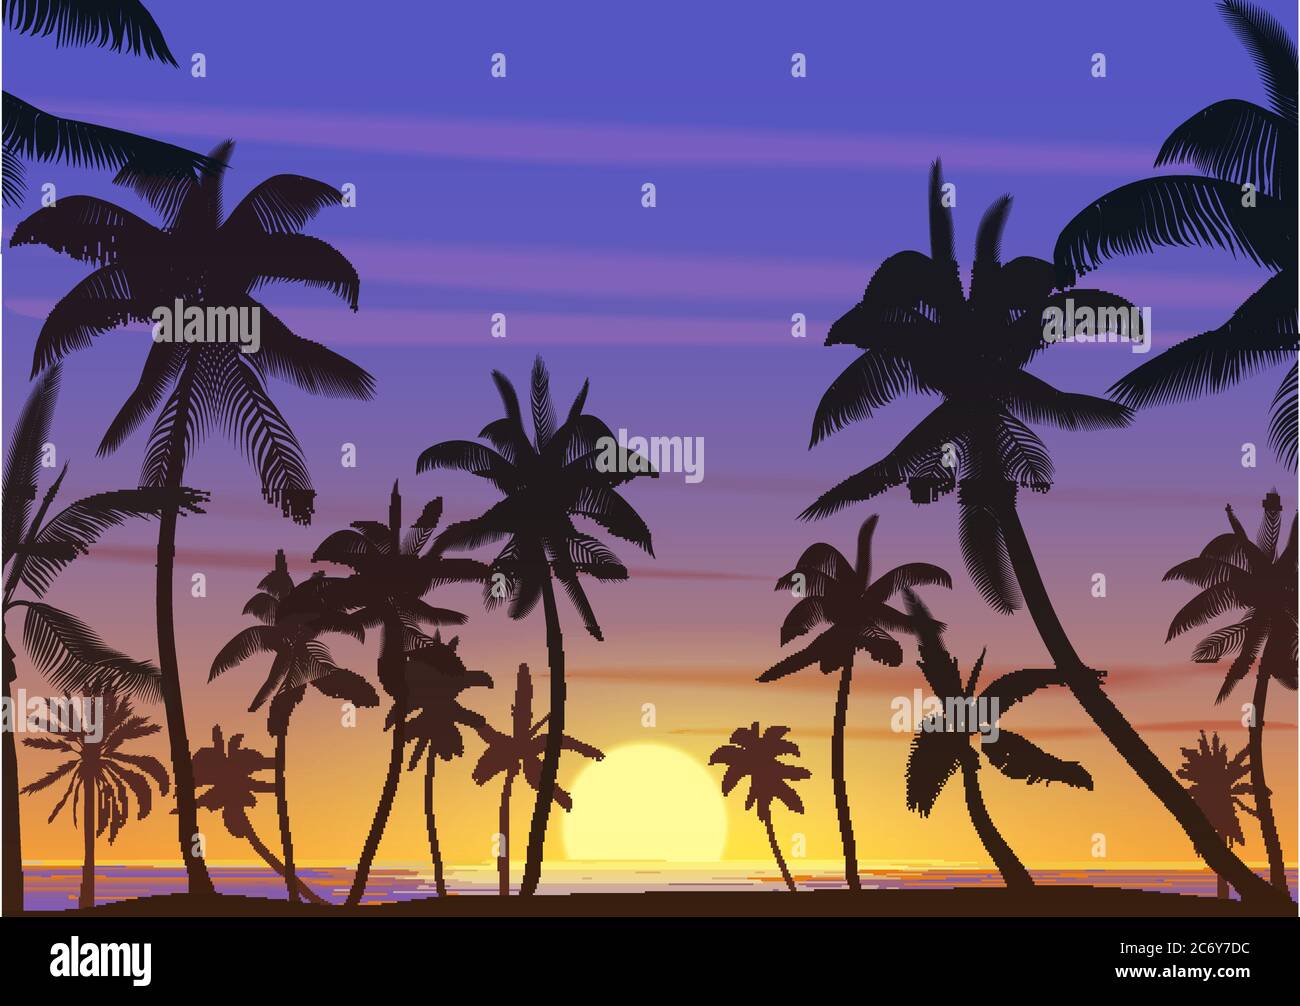 Palm coconut trees Silhouette at sunset or sunrise. Realistic vector illustration. Earth paradise on the beach Stock Vector